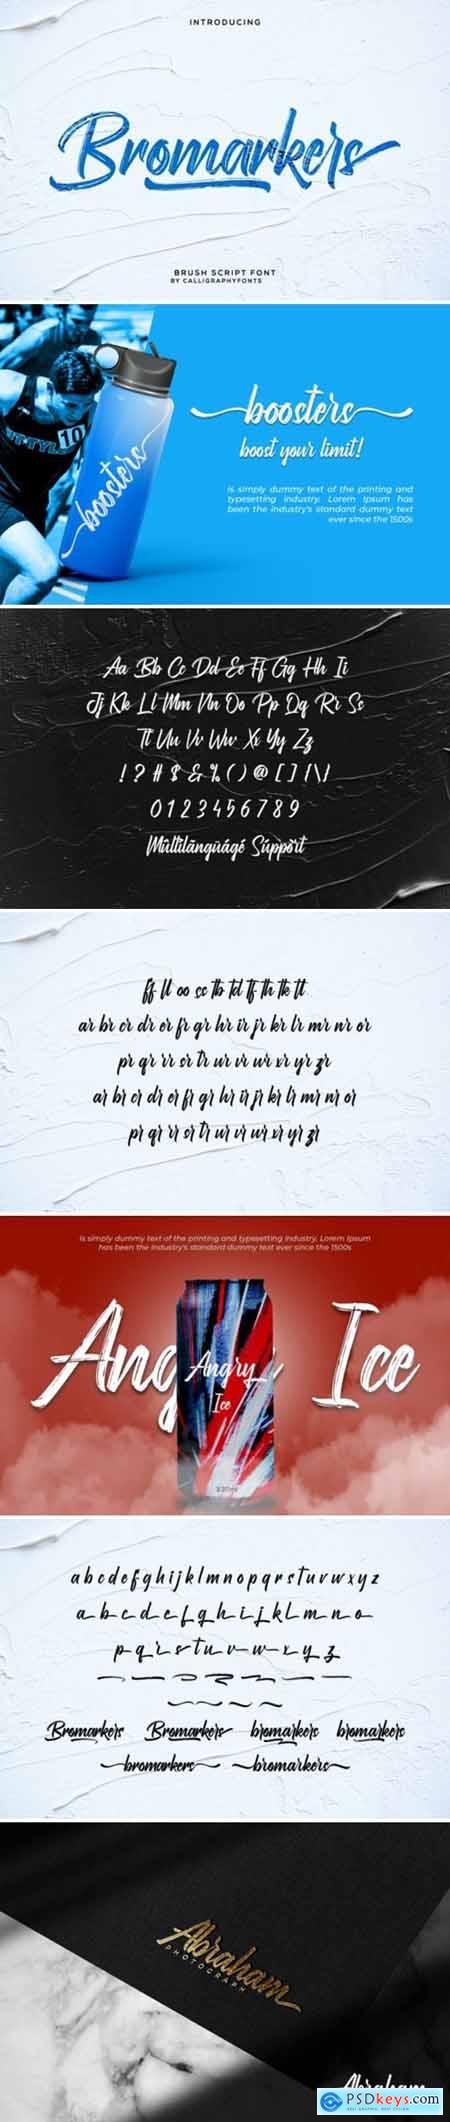 Bromarkers Font